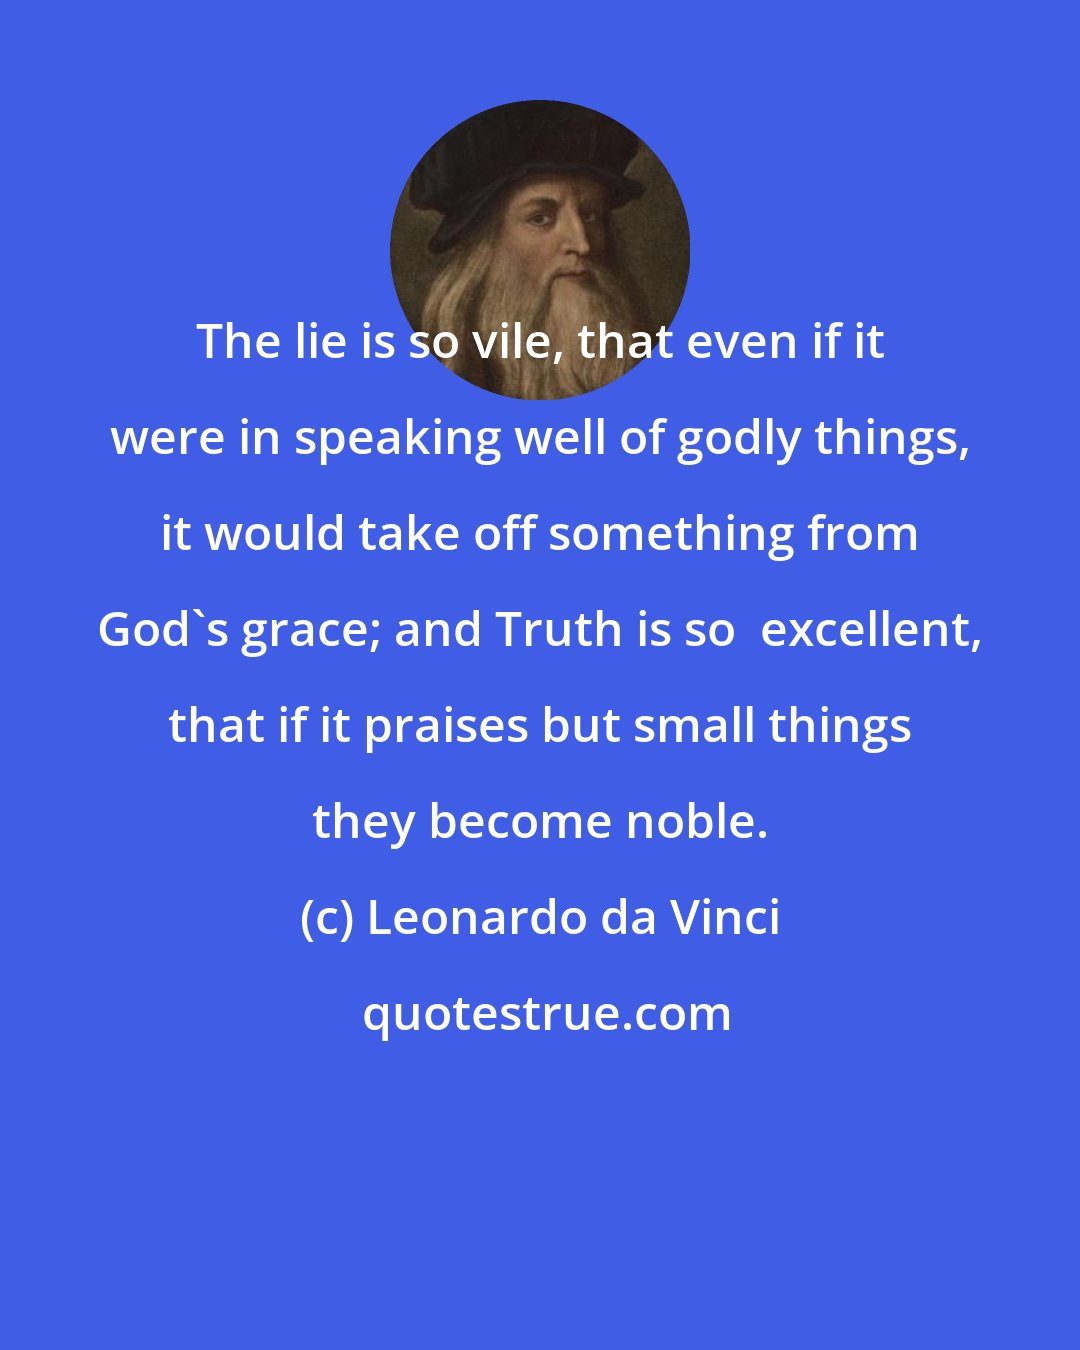 Leonardo da Vinci: The lie is so vile, that even if it were in speaking well of godly things, it would take off something from God's grace; and Truth is so  excellent, that if it praises but small things they become noble.